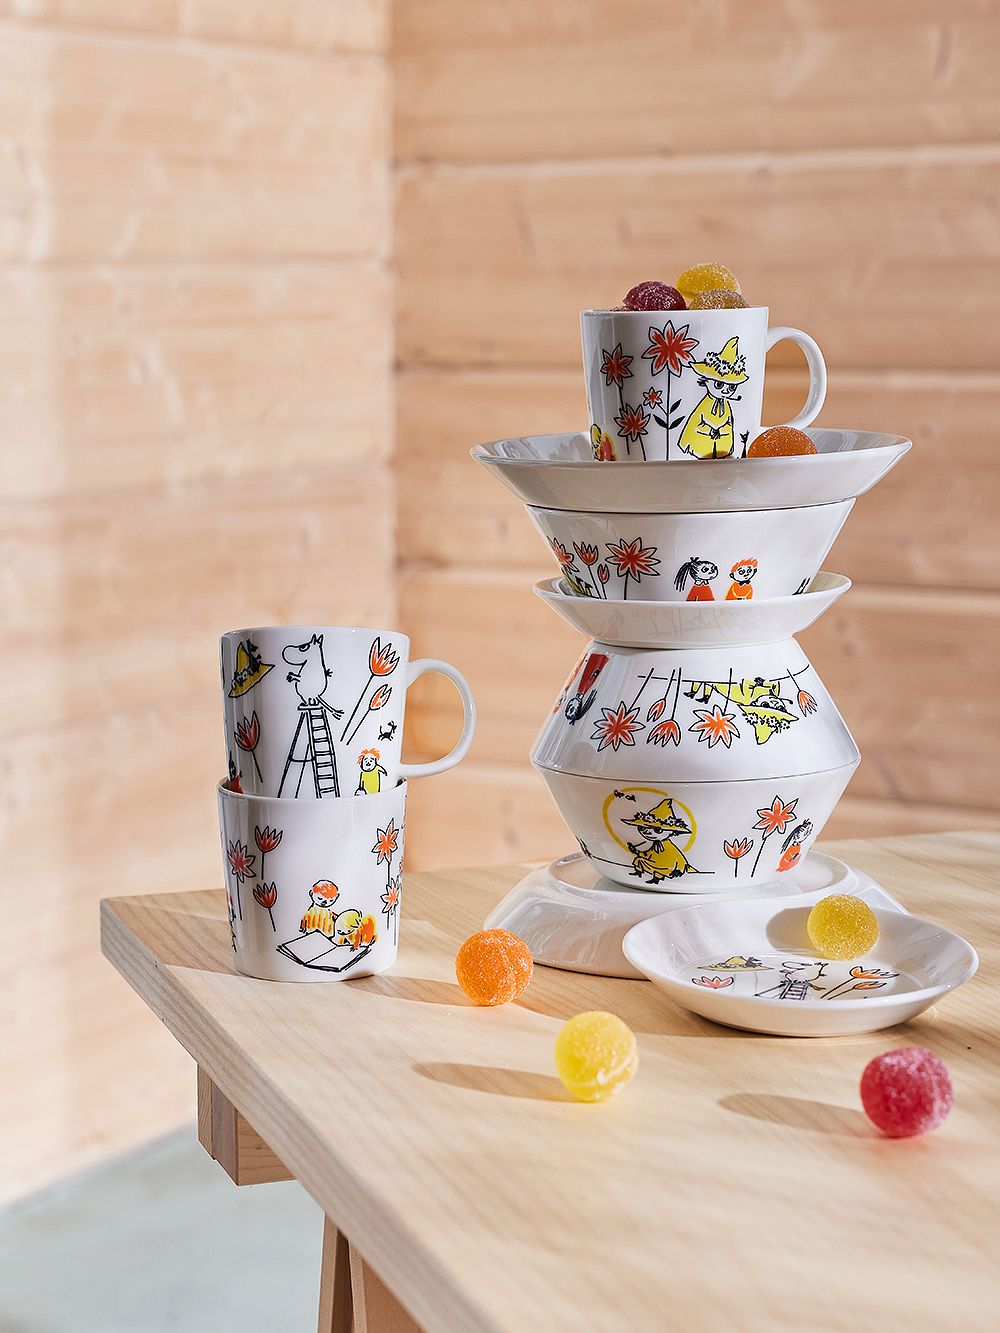 A quirky pile of Moomin by Arabia x Red Cross tableware on a wooden table: mugs, plates, bowls.